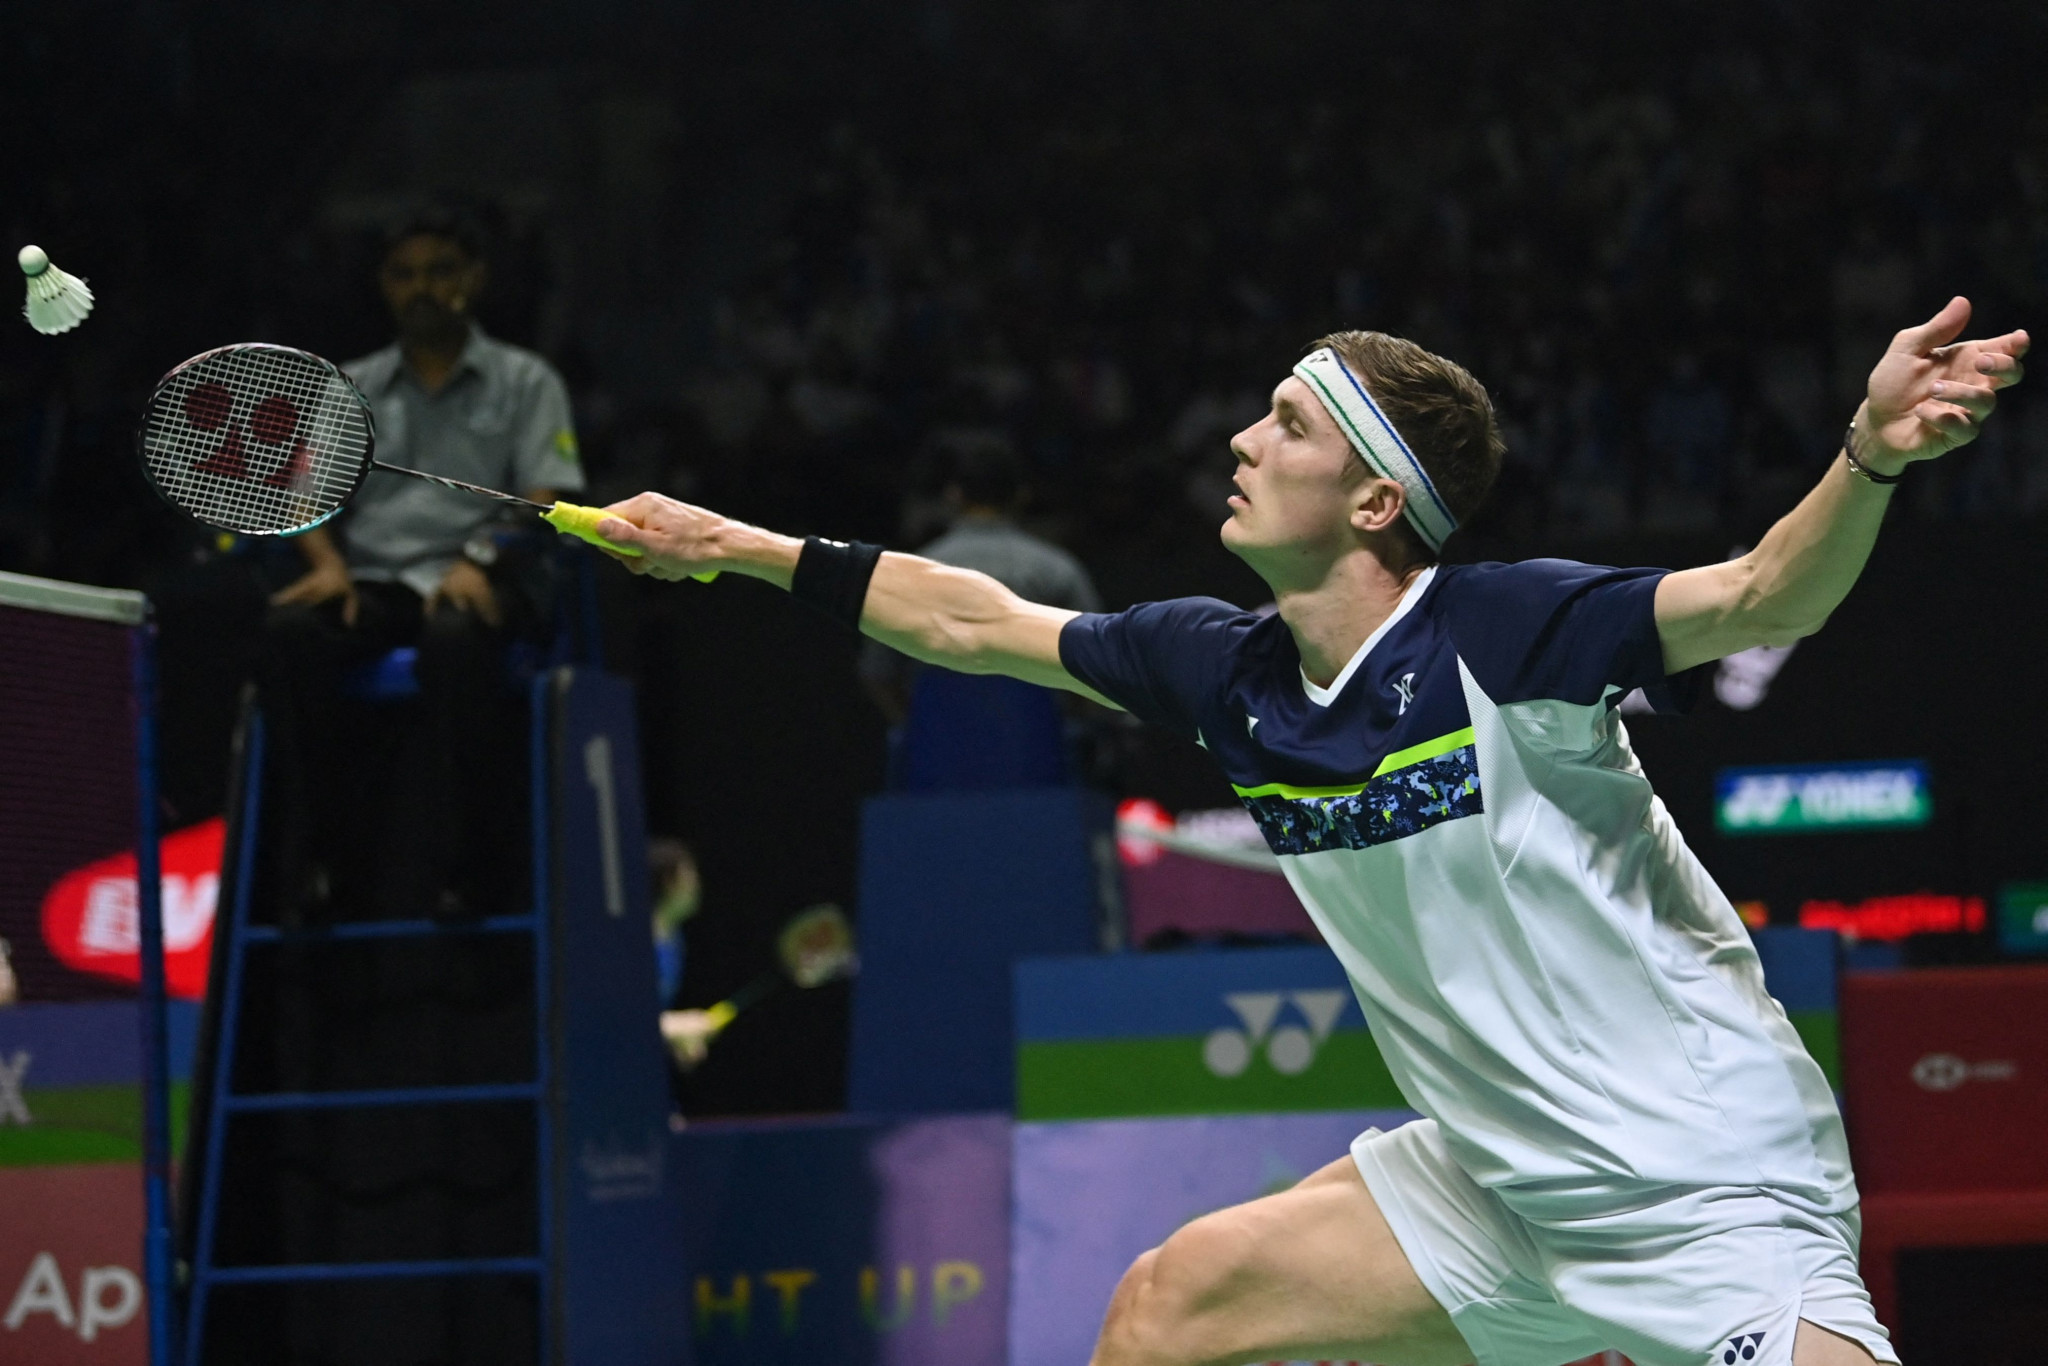 Olympic champion Viktor Axelsen marched into the quarter-finals ©Getty Images